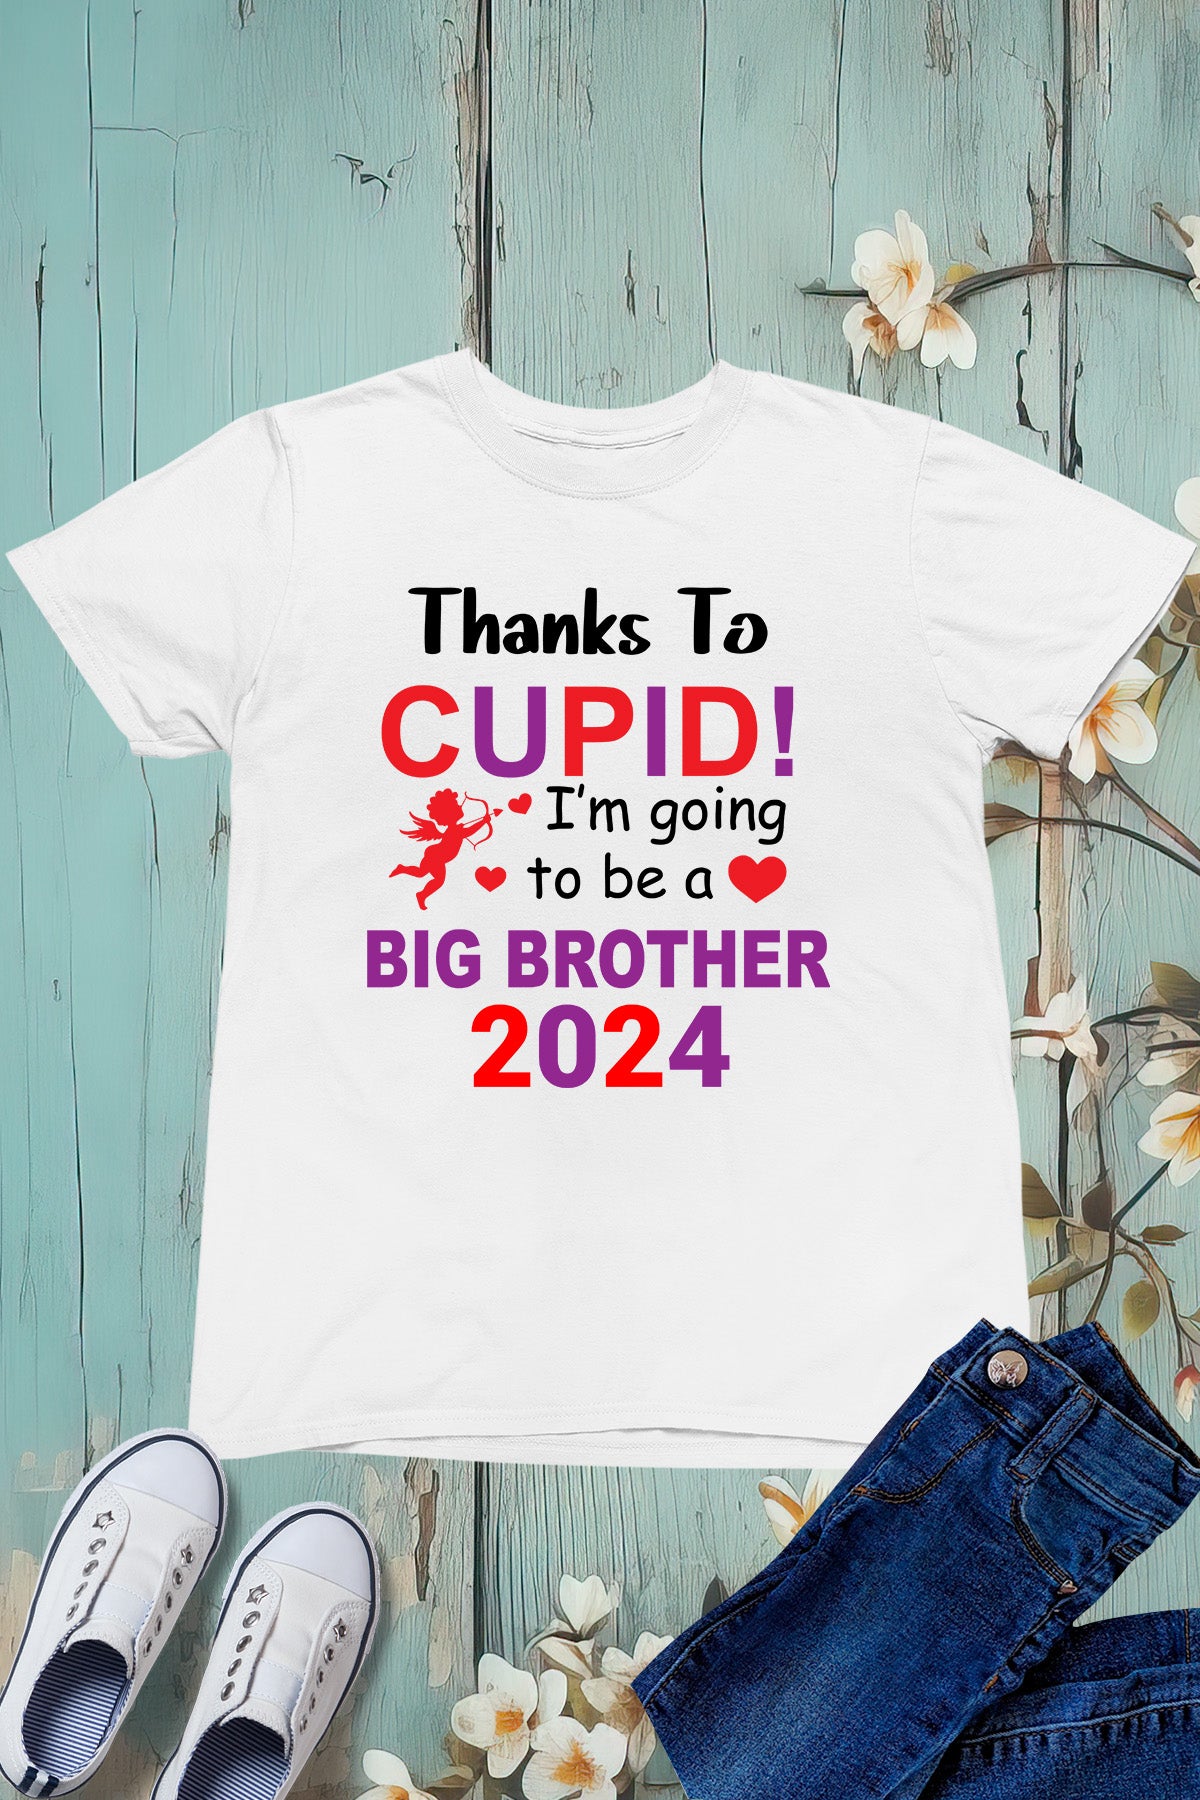 Thanks To Cupid I'm Going To be a Big Brother Kids T Shirt